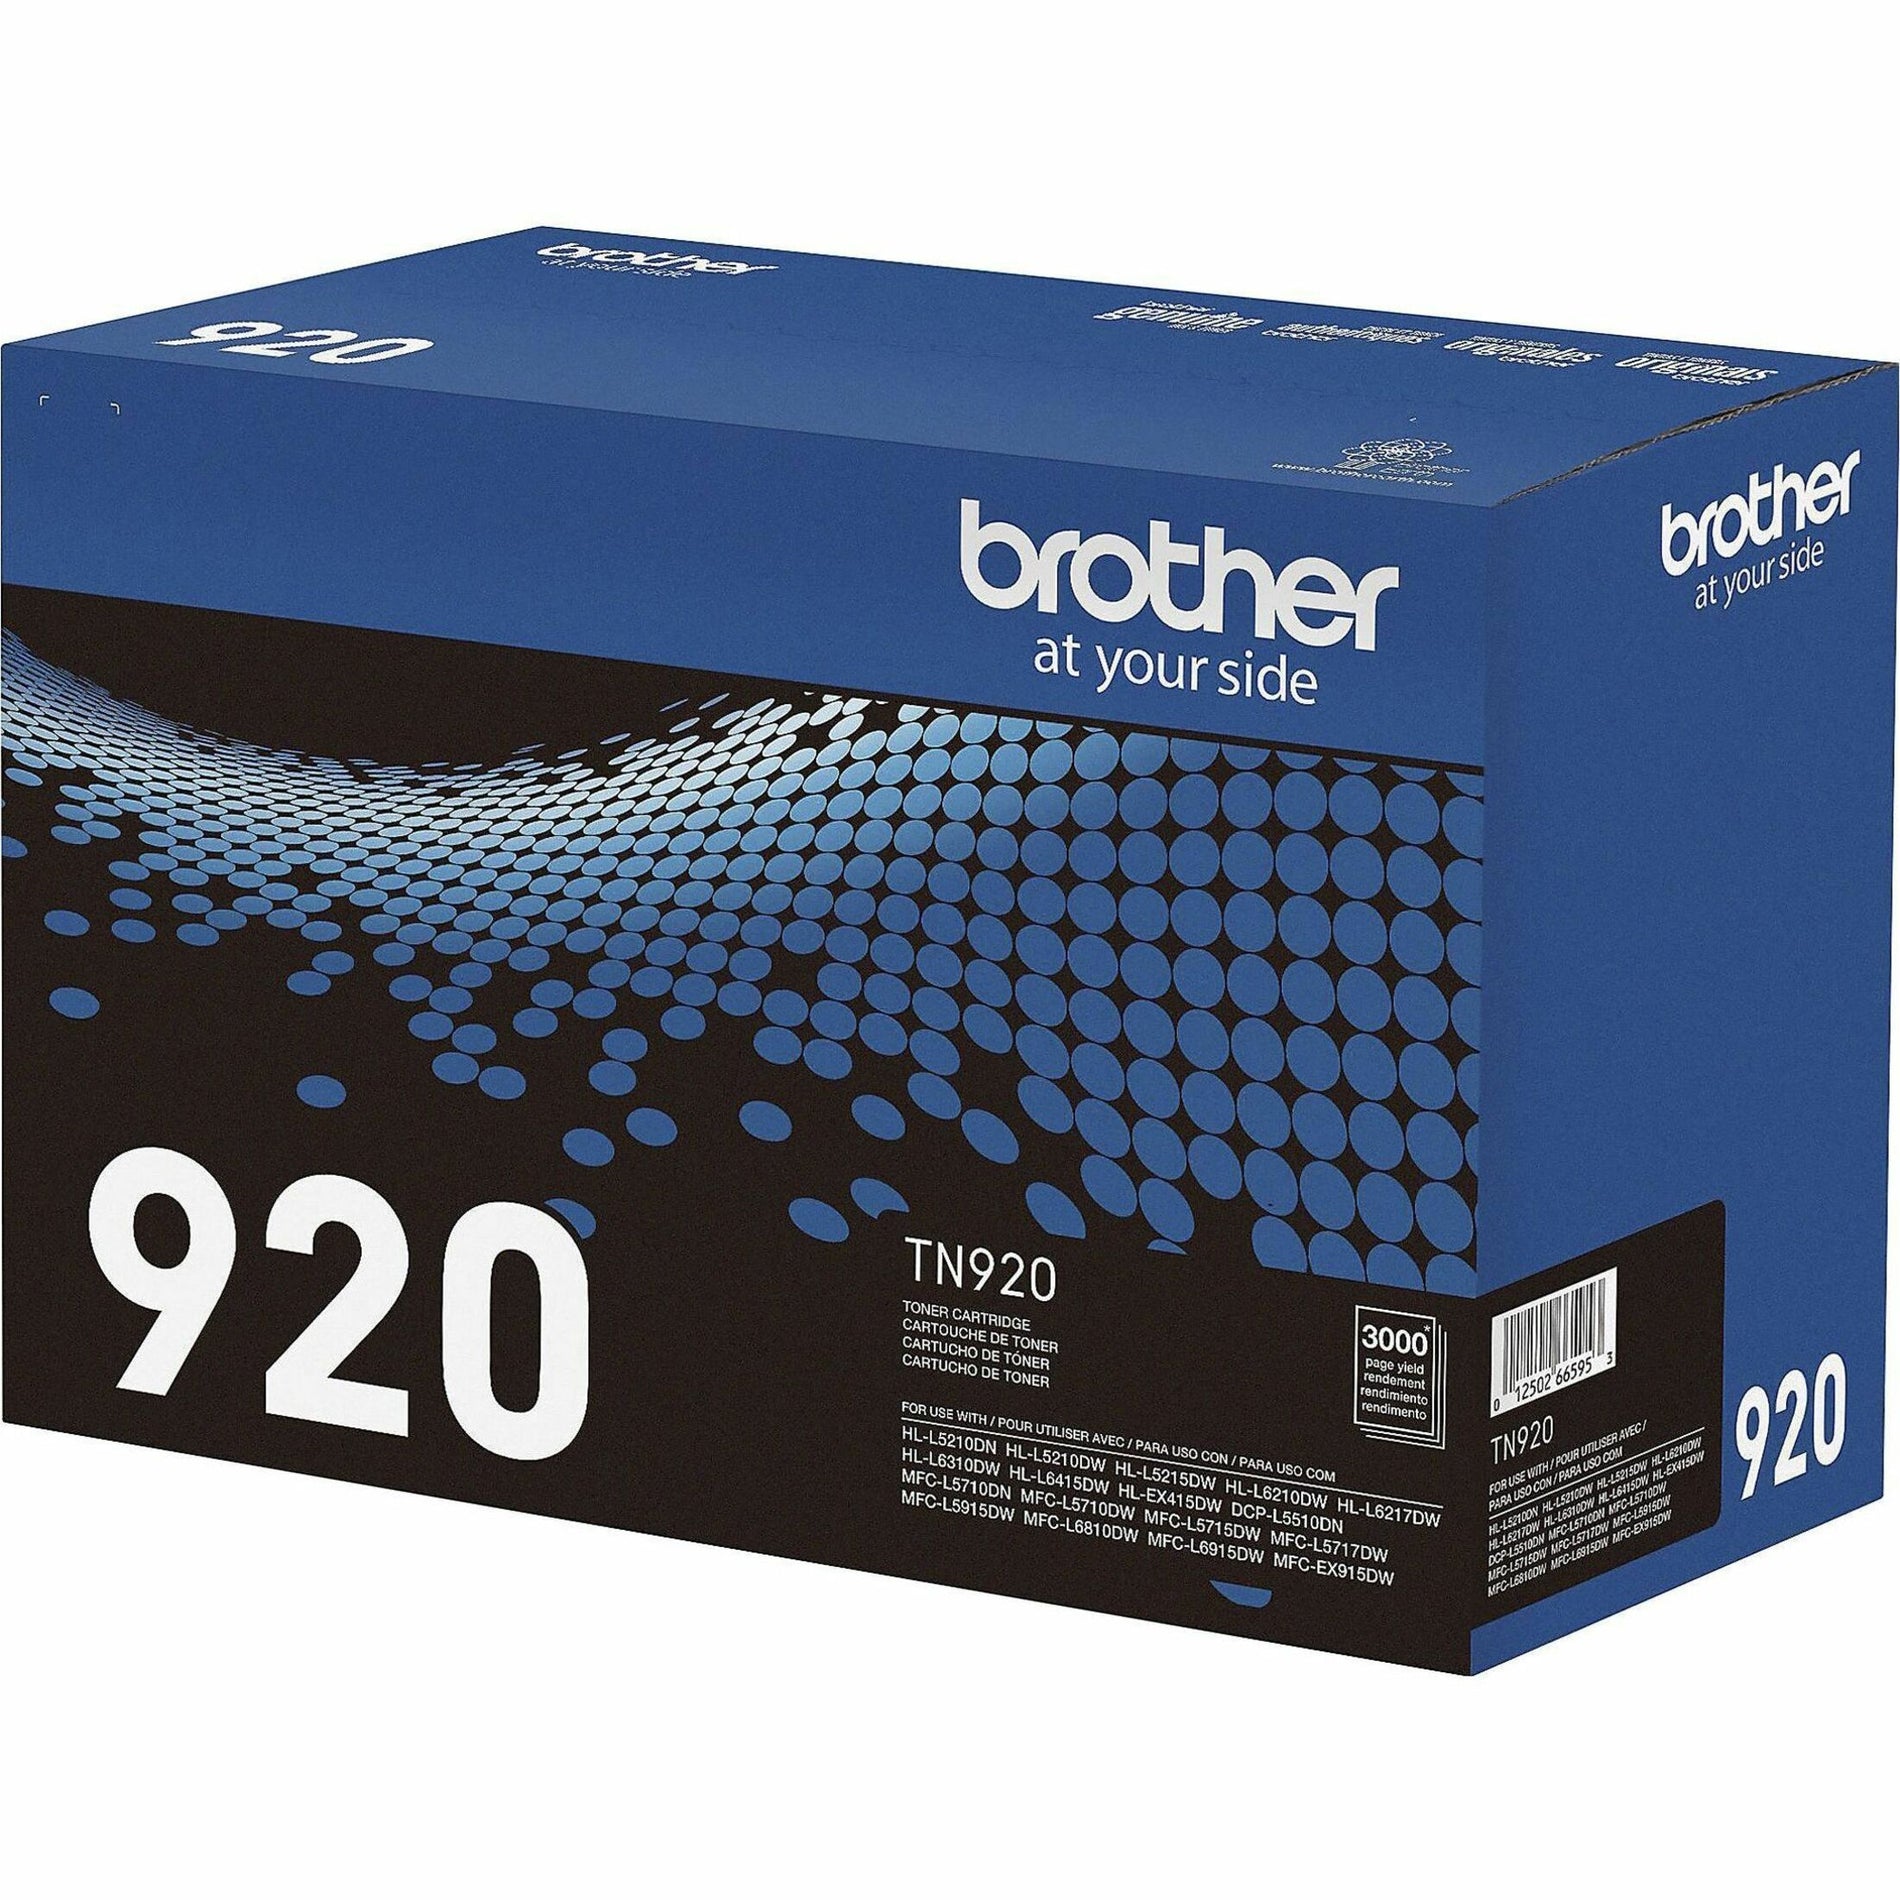 Brother TN920 Standard Yield Toner Cartridge, Black, 3000 Pages